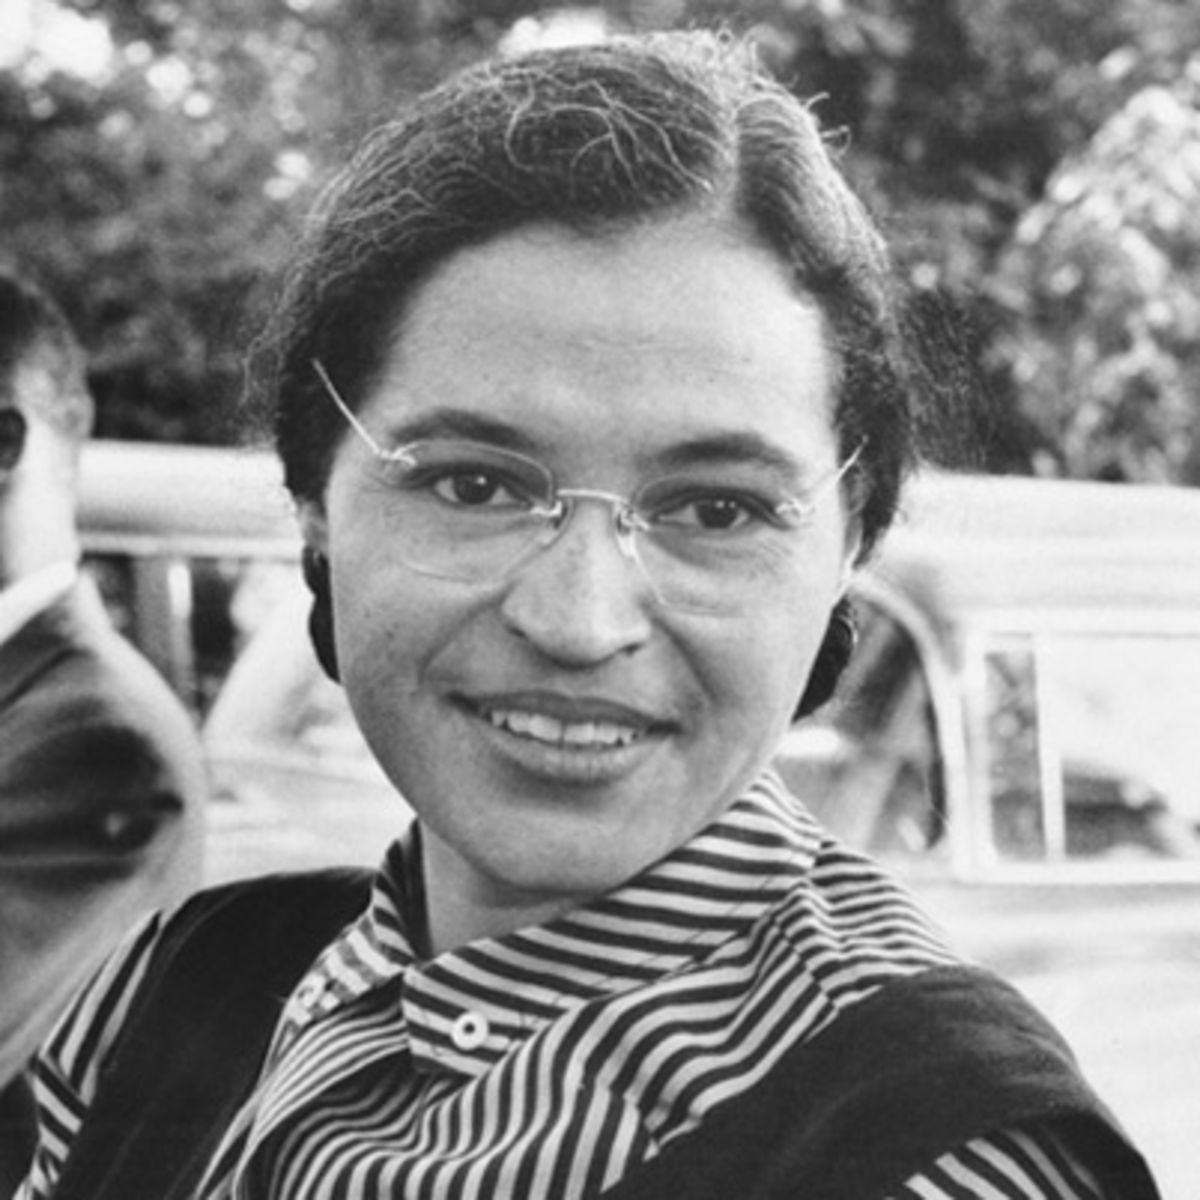 Wallpaper Of The Day Rosa Parks Image